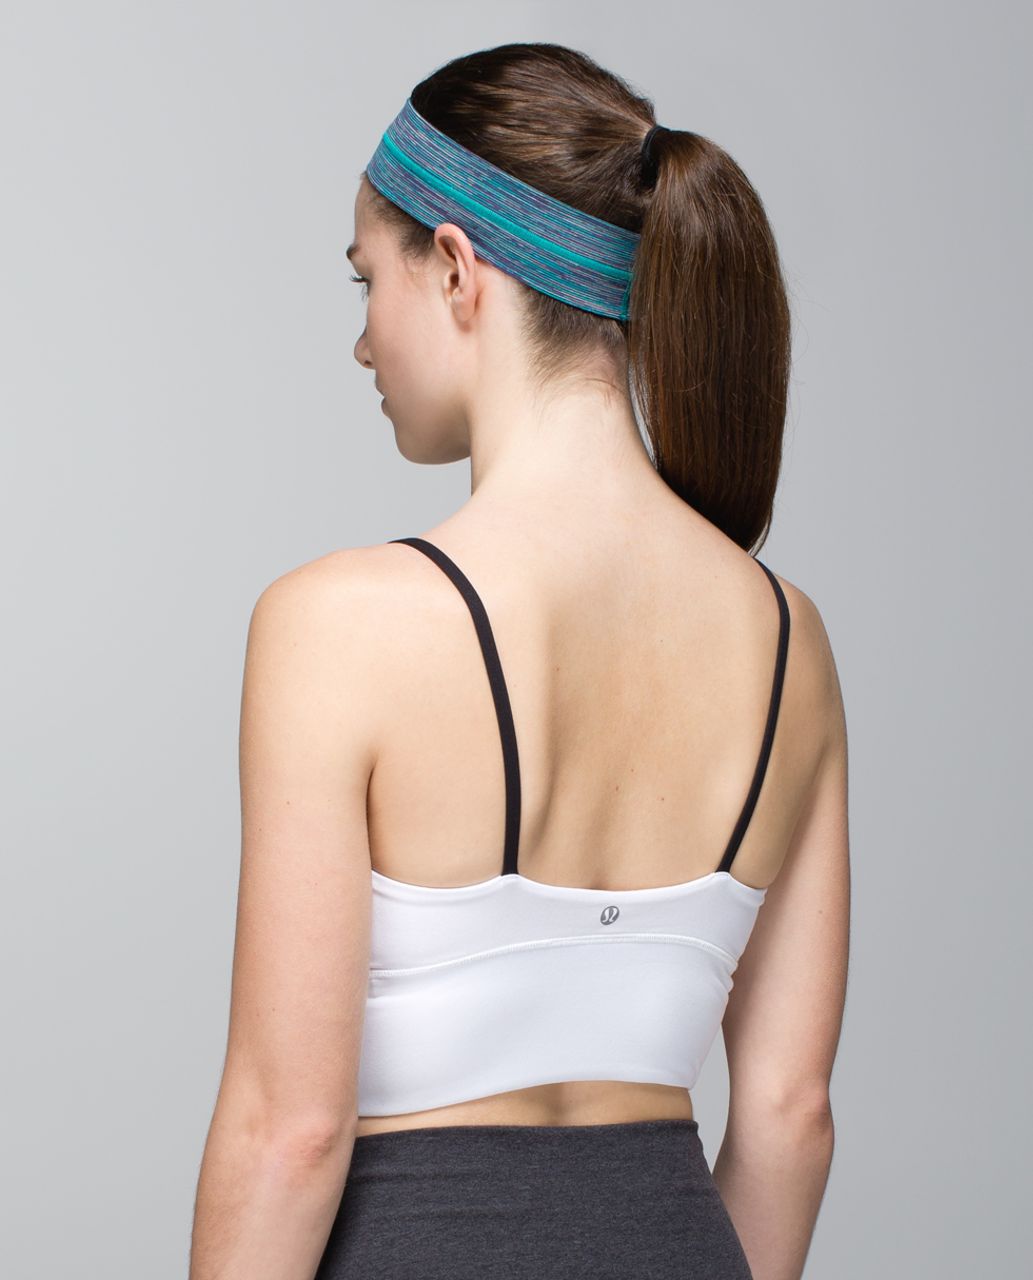 Lululemon Fly Away Tamer Headband - Wee Are From Space Blue Tropics